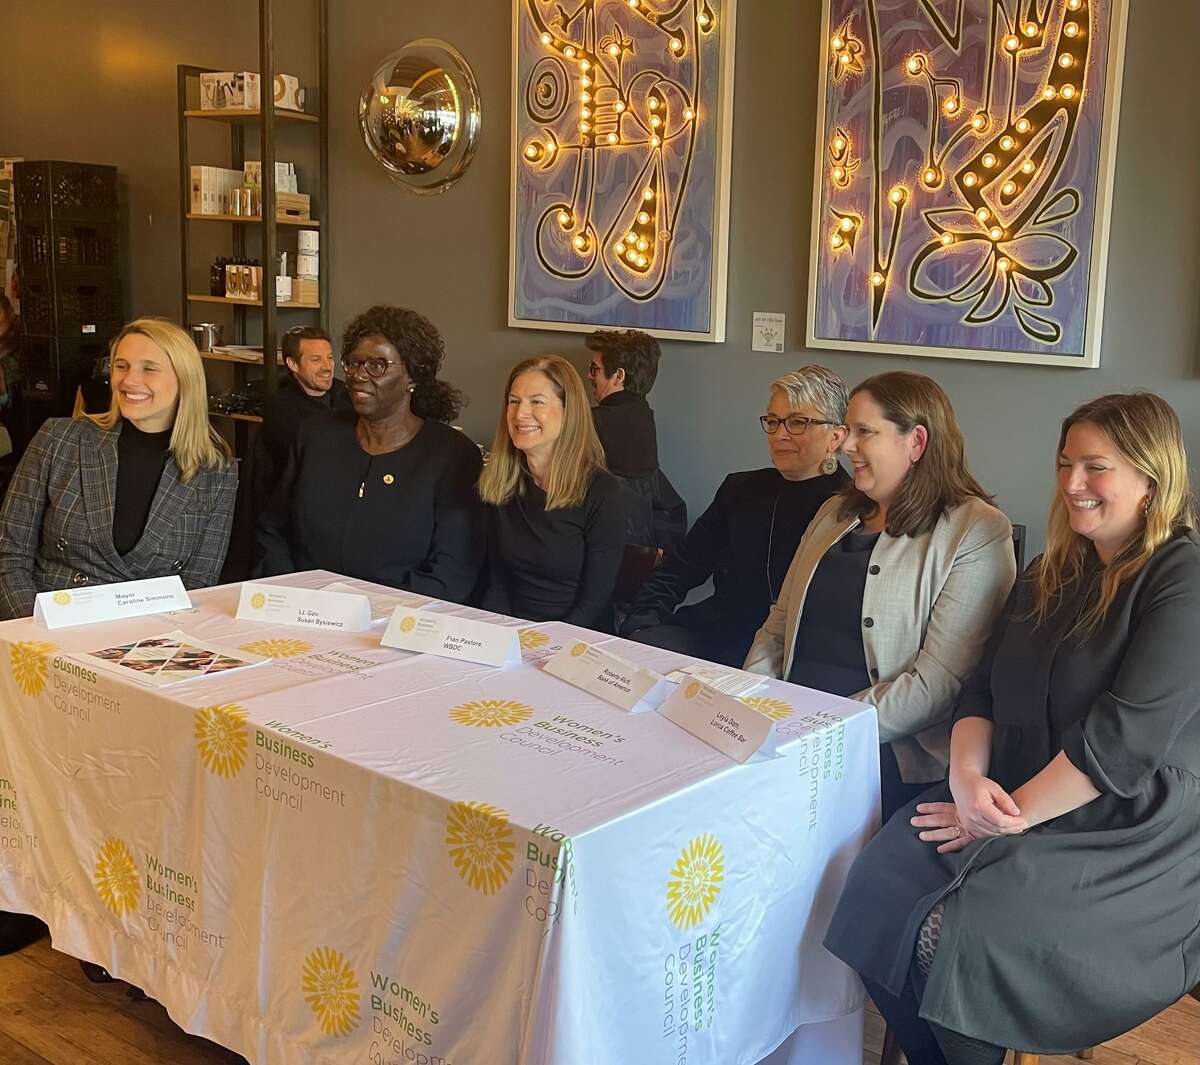 From left, Stamford Mayor Caroline Simmons, state Sen. Patricia Billie Miller, D-Stamford, Lt. Gov. Susan Bysiewicz, Women’s Business Development Council founder and CEO Fran Pastore, Bank of America consumer bank market leader Roberta Rich and Lorca Coffee Bar owner Leyla Dam gather at Lorca in downtown Stamford, Conn., on Monday, March 28, 2022, to discuss the WBDC’s Equity Match Grant Program.